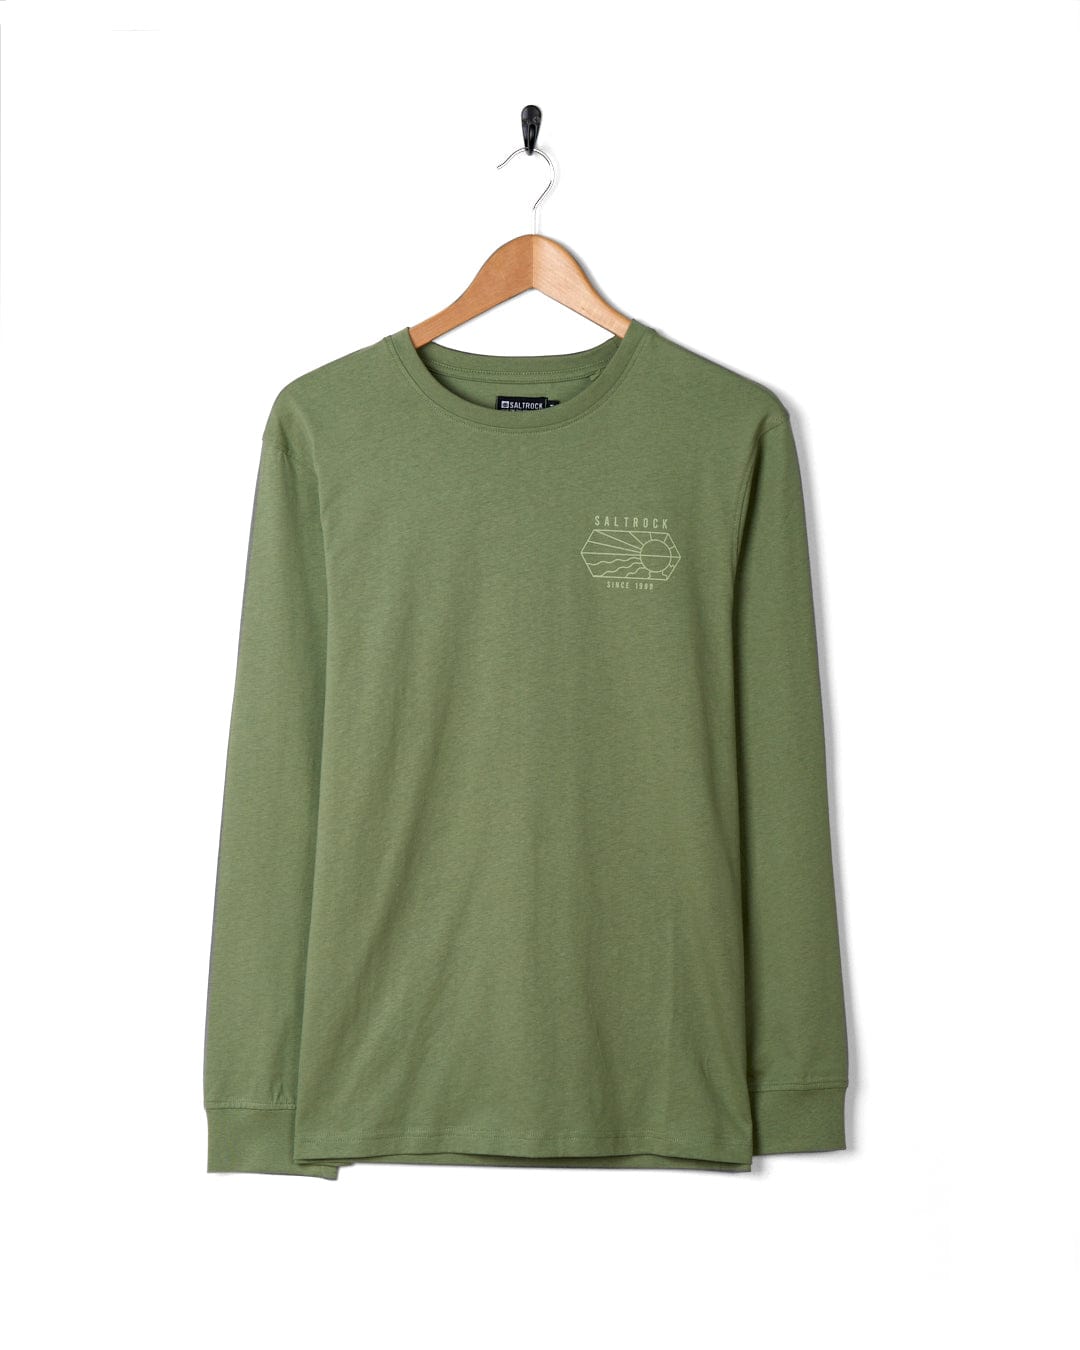 A Vantage Outline - Mens Long Sleeve T-Shirt in green from Saltrock gracefully hangs on a hanger.